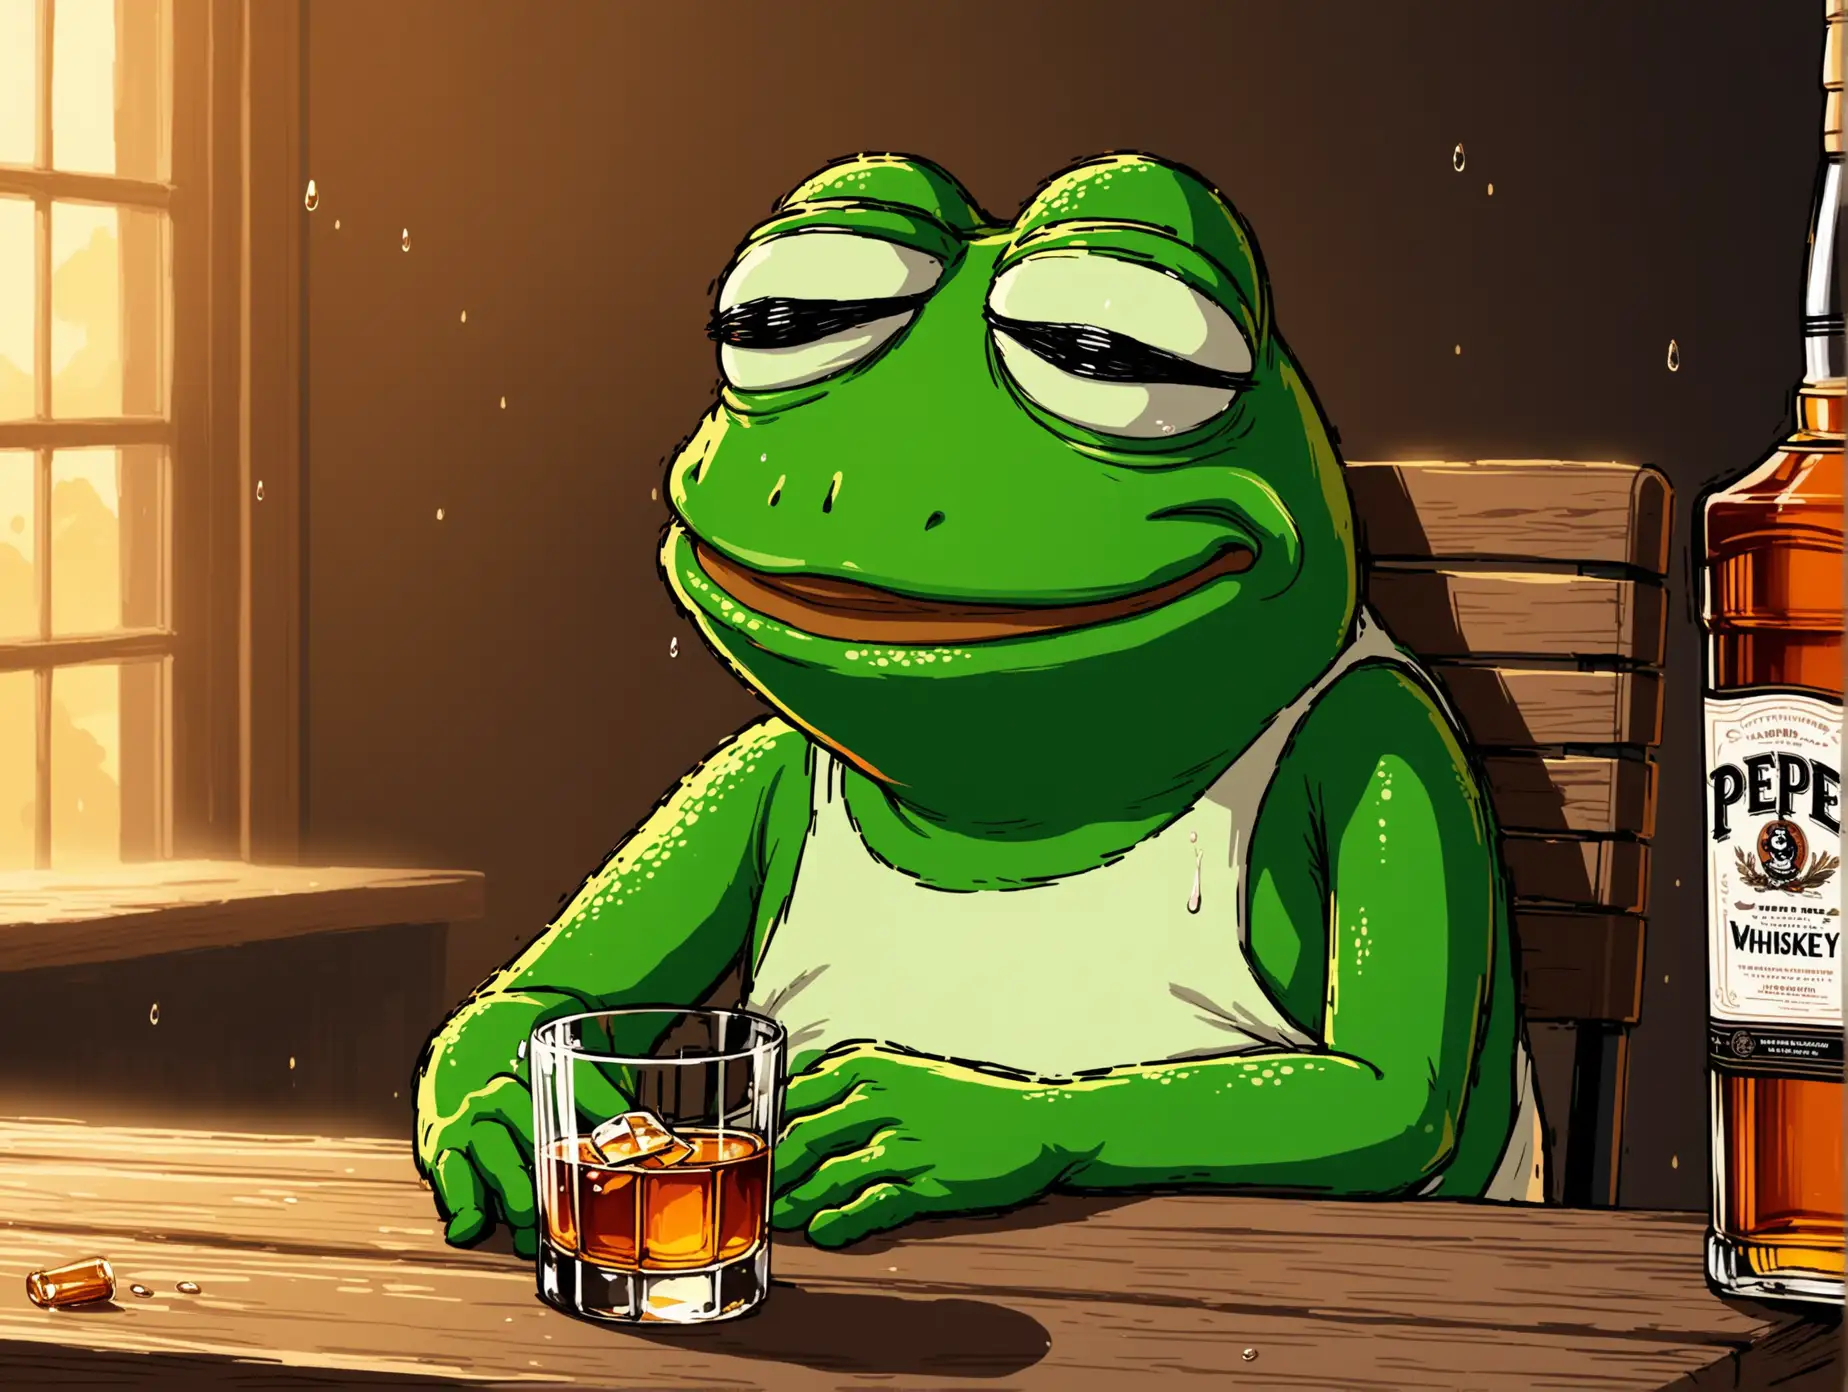 Pepe the Frog slowly sips whiskey, his eyes brimming with tears. The vibrations from the weight of this moment fill the scene.
The scene creates an image of a truly emotional moment, a collapse, and desolation. Pepe is seated on a chair by a wooden table and in front of him is a glass of whiskey, his face mirrors deep sadness. Pepe's head is hung low and tears are streaming down his cheeks.
The color palette could be mixed - the warm hues of the whiskey contrast with the cool of his tears. Conversely, the backdrop could be muted to make Pepe and his emotions the focal point. 2D